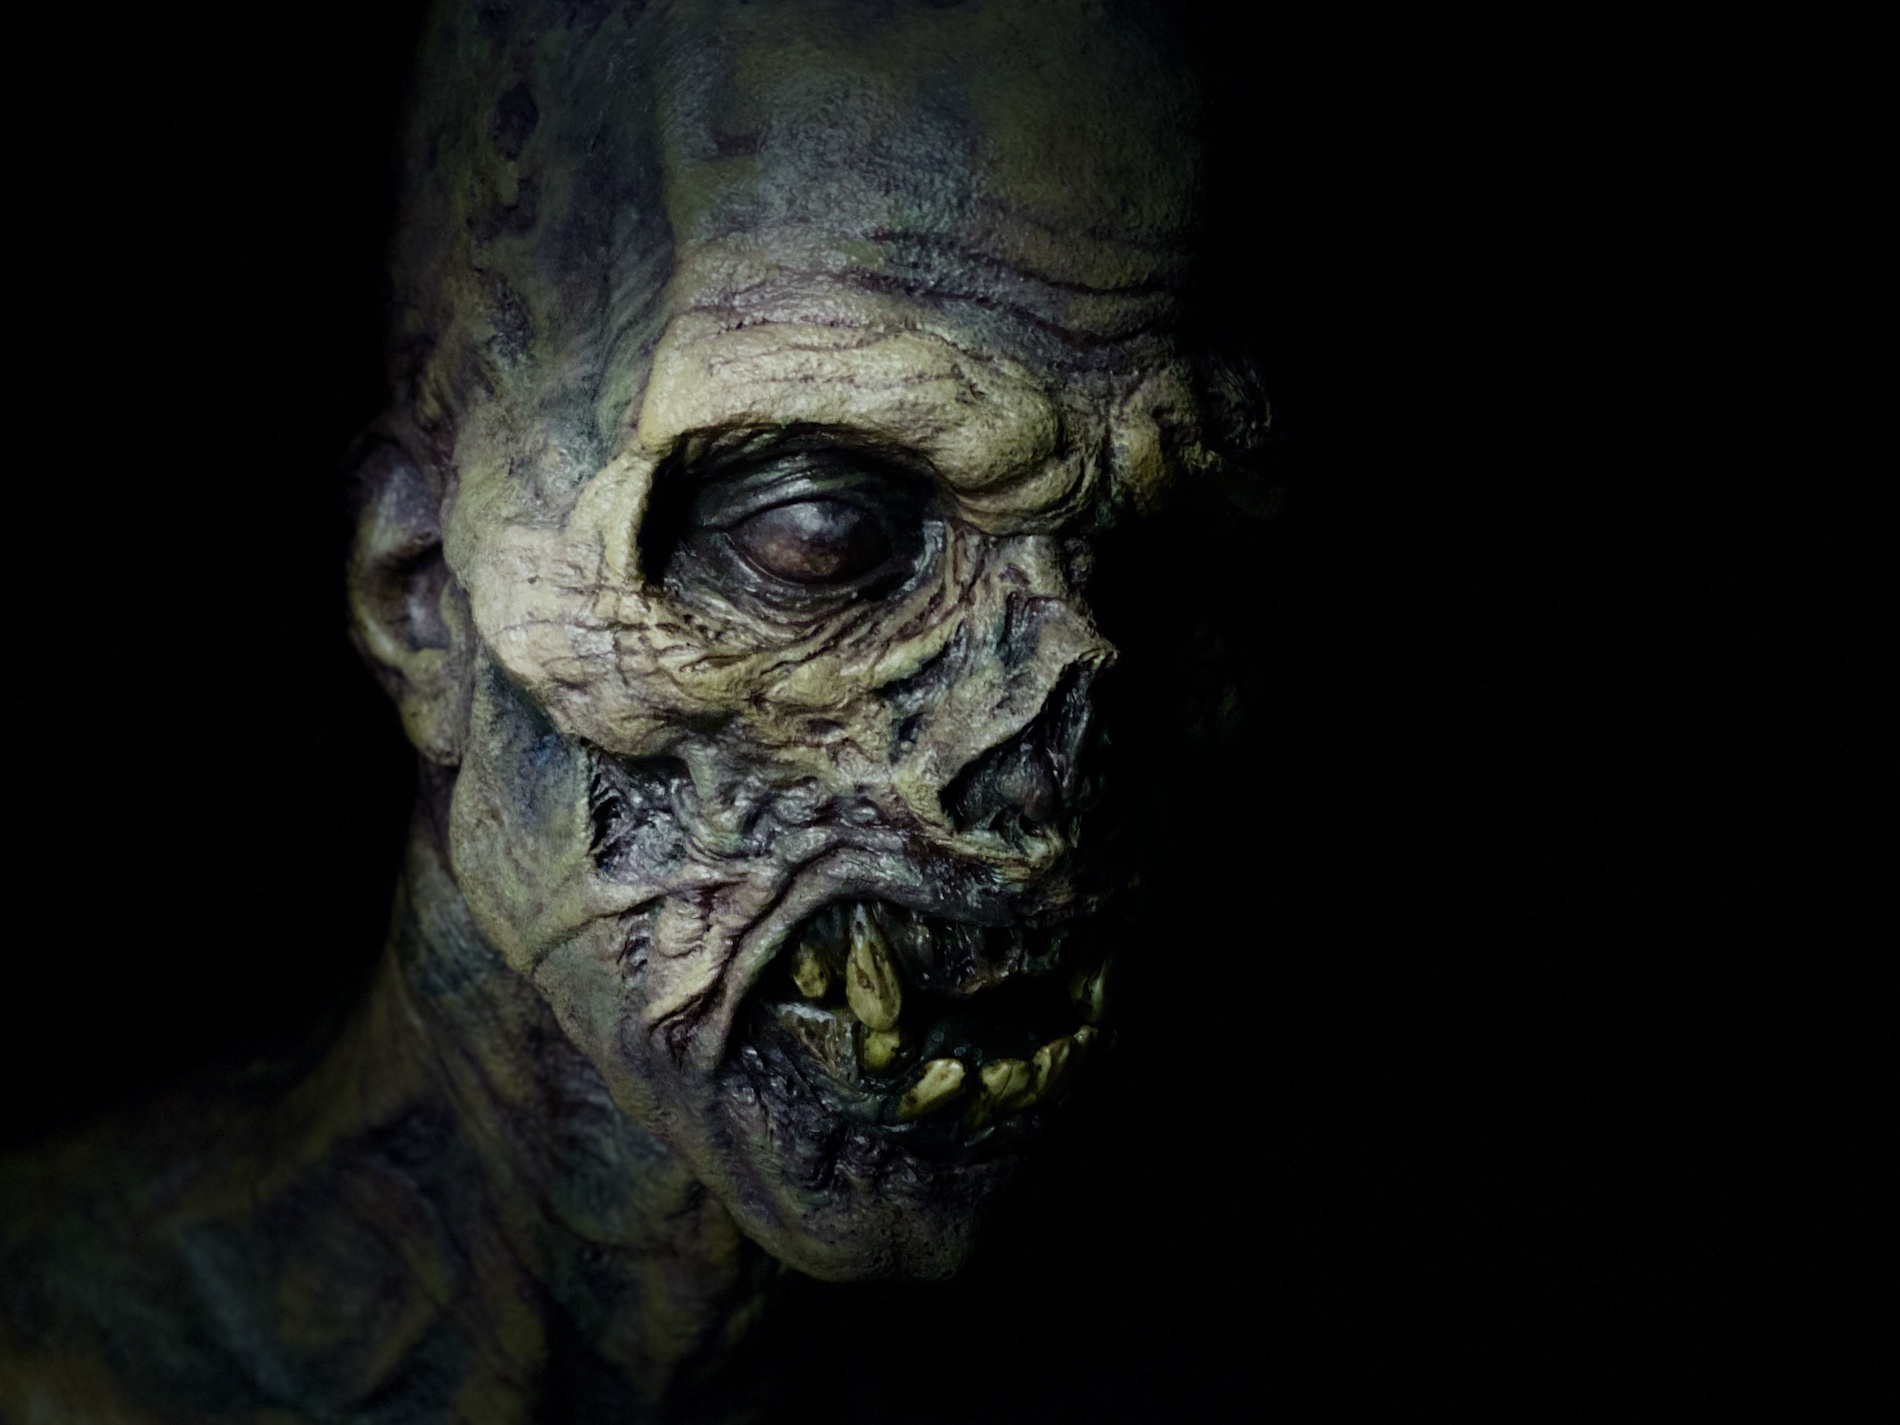 How COVID-19 Shaped a New Zombie Process on 'The Walking Dead